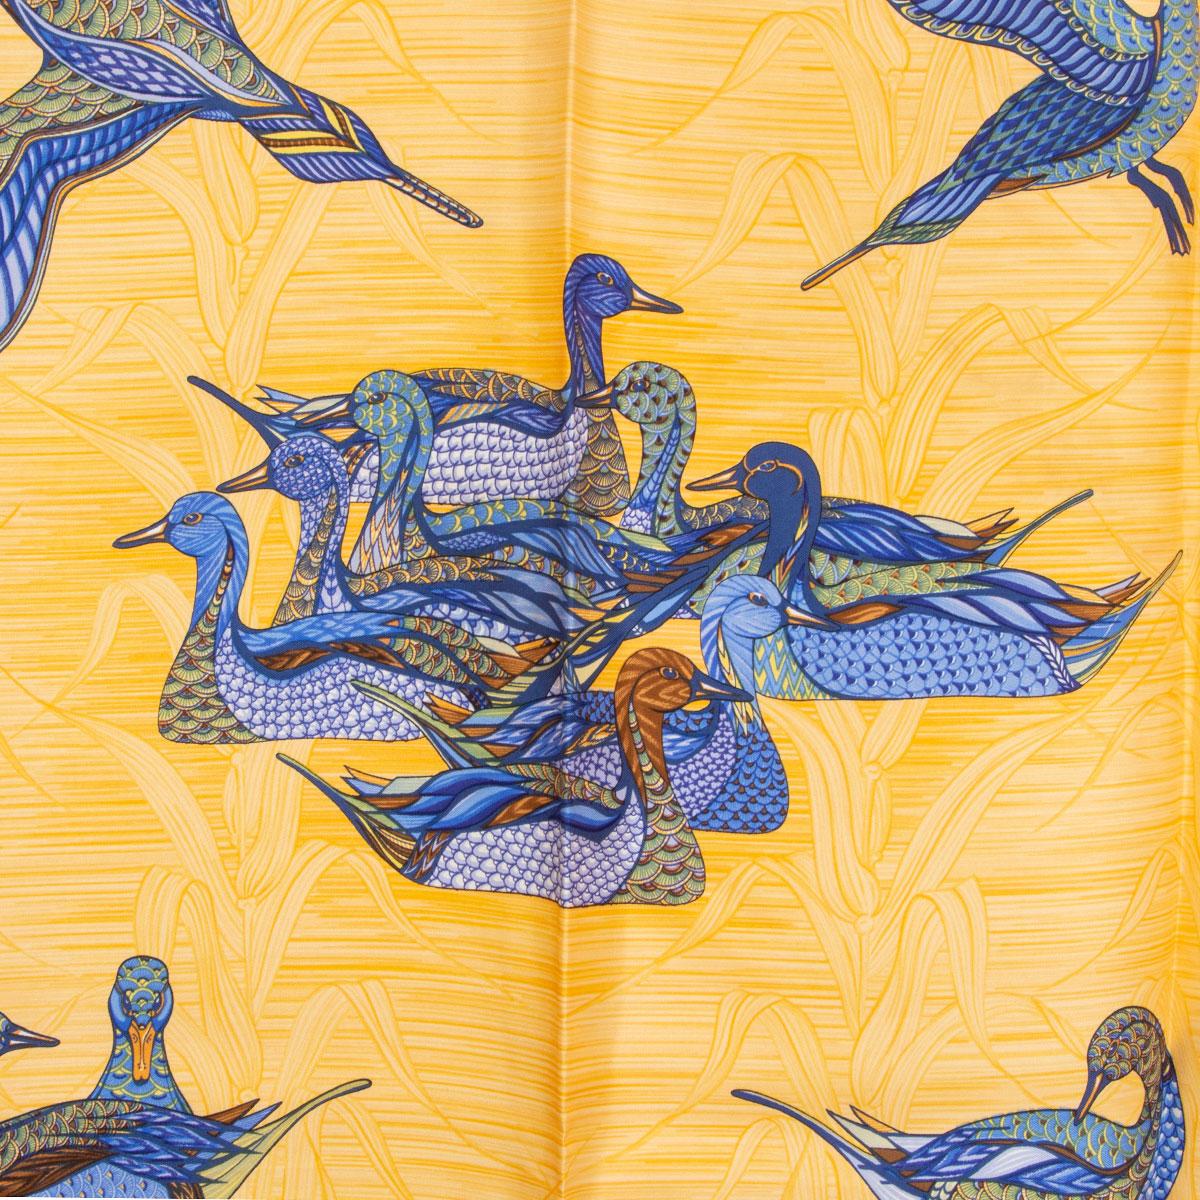 100% authentic Hermes 'La Mare aux Canards 90' scarf by Daphne Duchesne in orange silk twill (100%) with details in gblue, navy and green. Has been worn and is in excellent condition.

Width	90cm (35.1in)
Height	90cm (35.1in)

All our listings